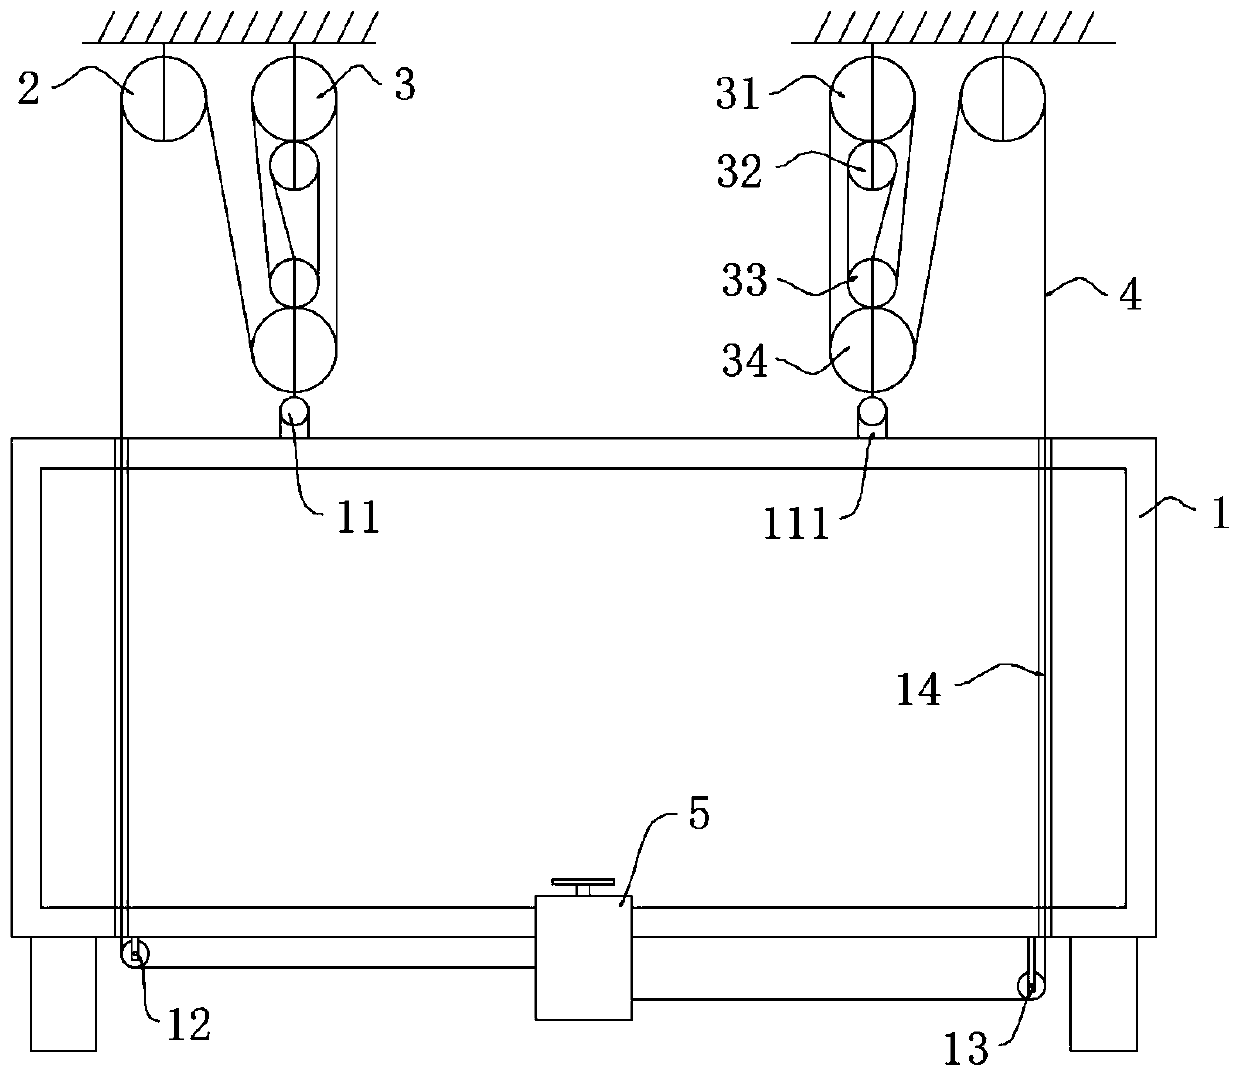 Building engineering manual lifting device